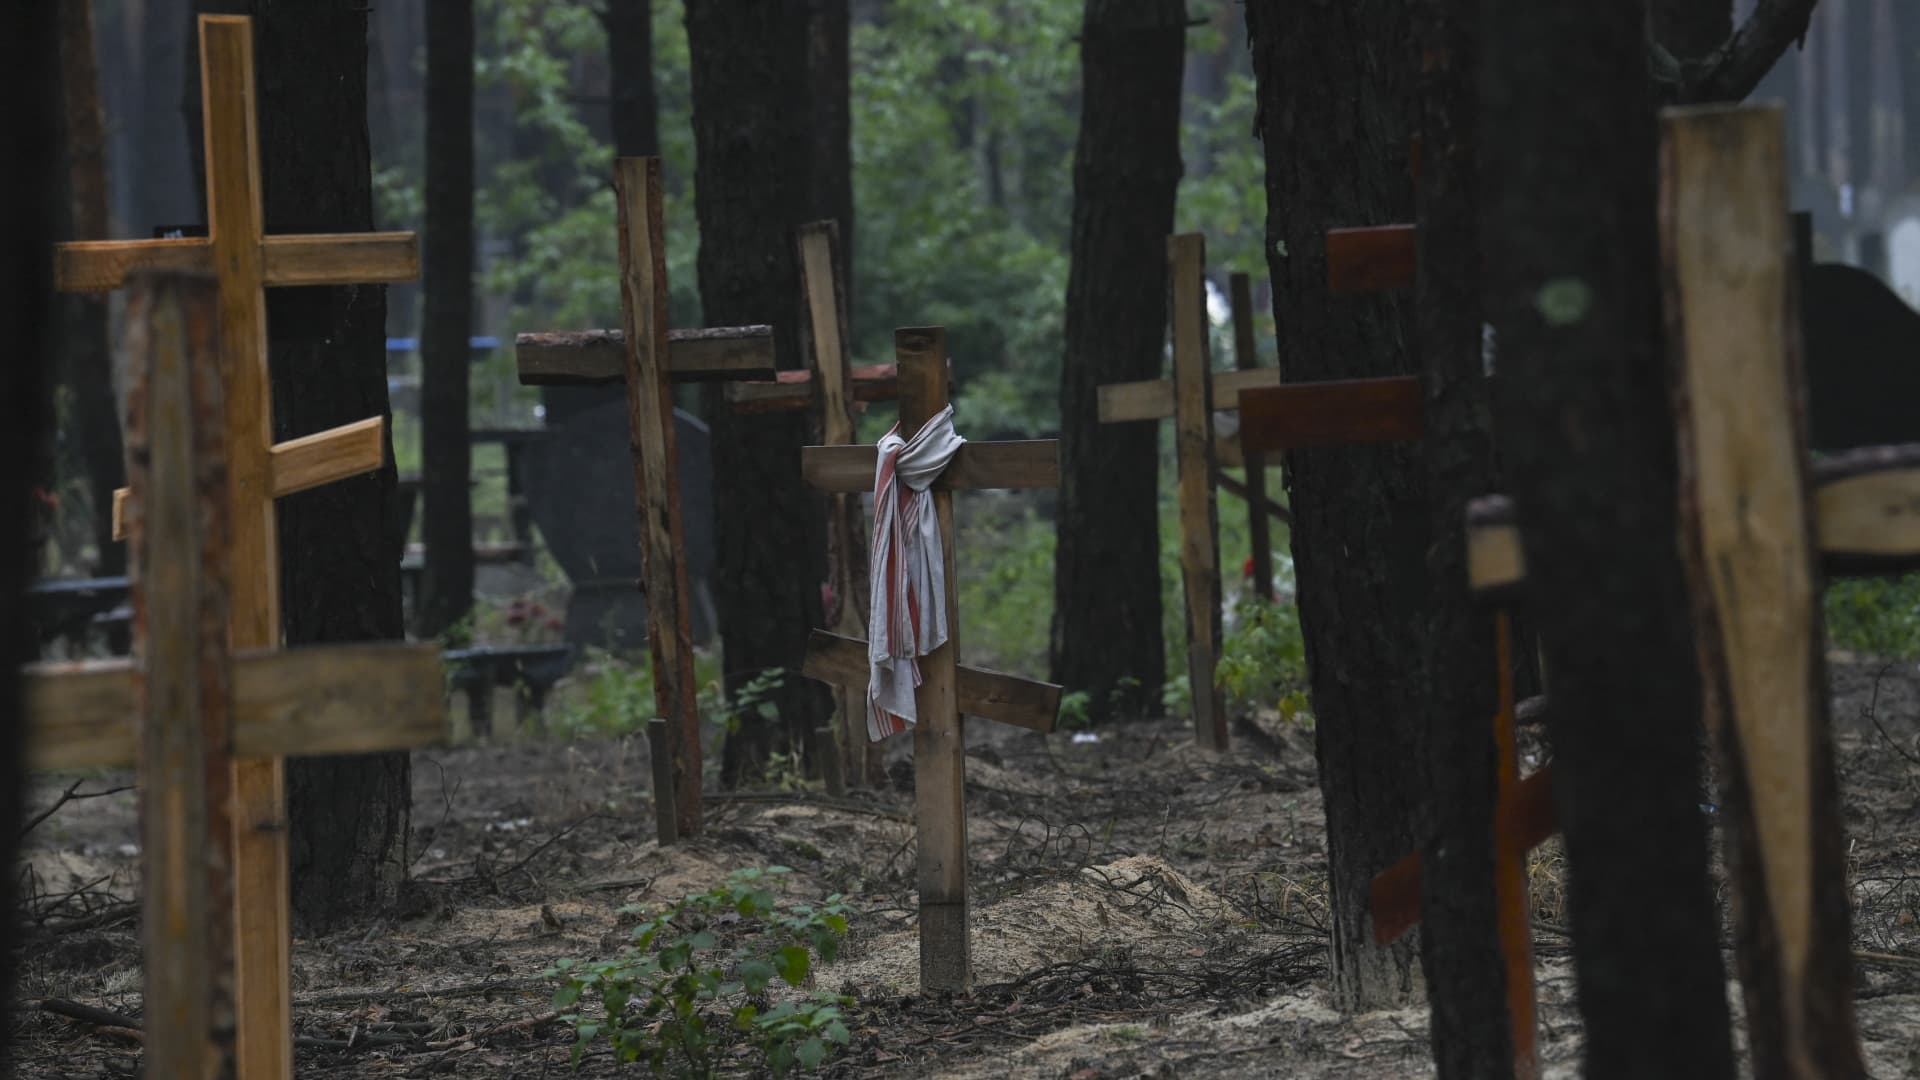 This photograph taken eastern Ukraine on September 16, 2022 shows crosses at a burial site in a forest on the outskirts of Izyum.